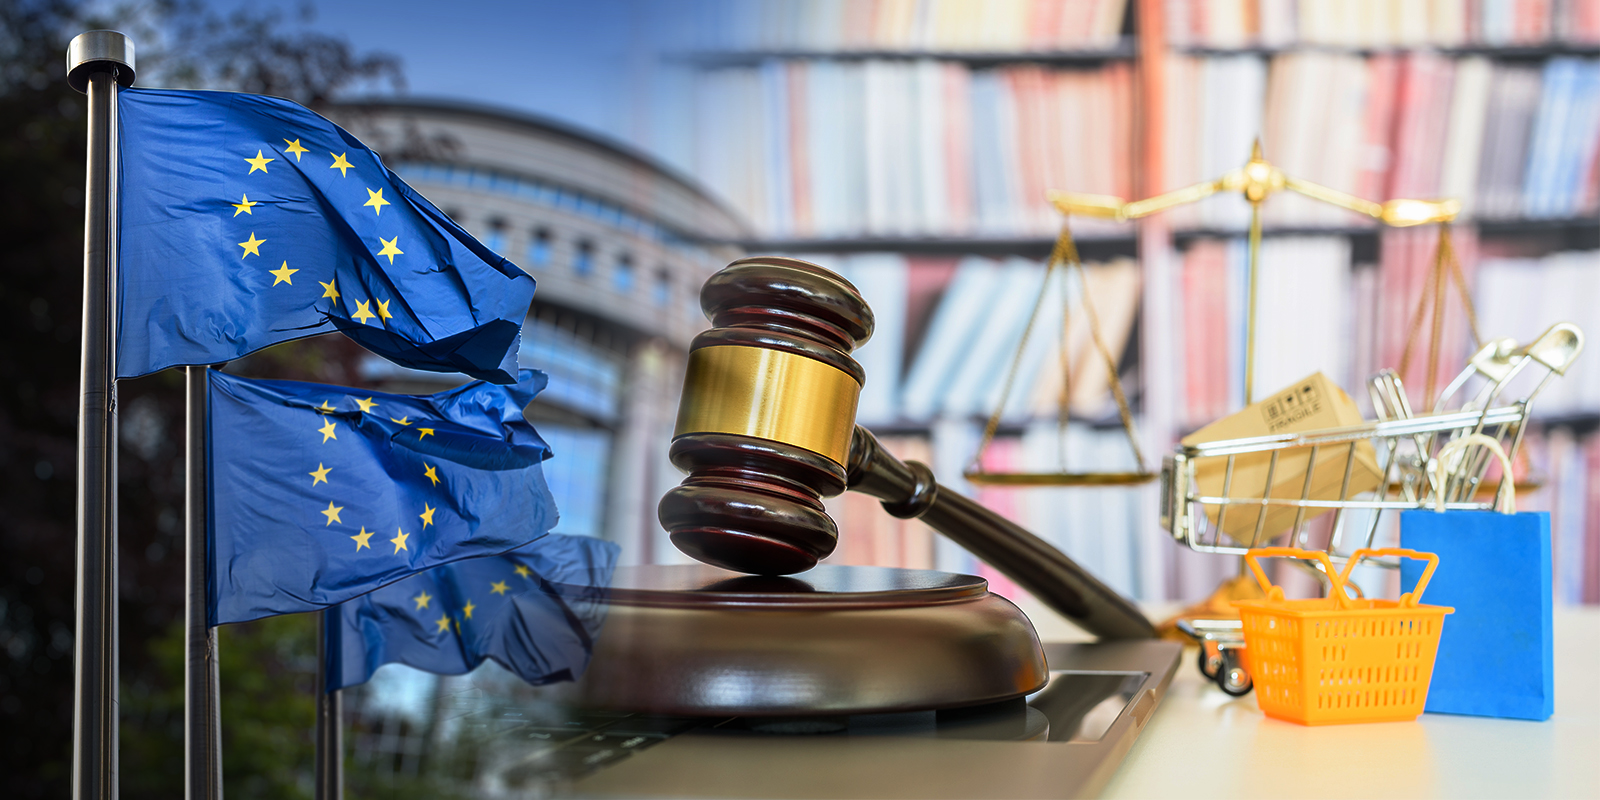 Dramatic Changes to EU Product Liability Rules?